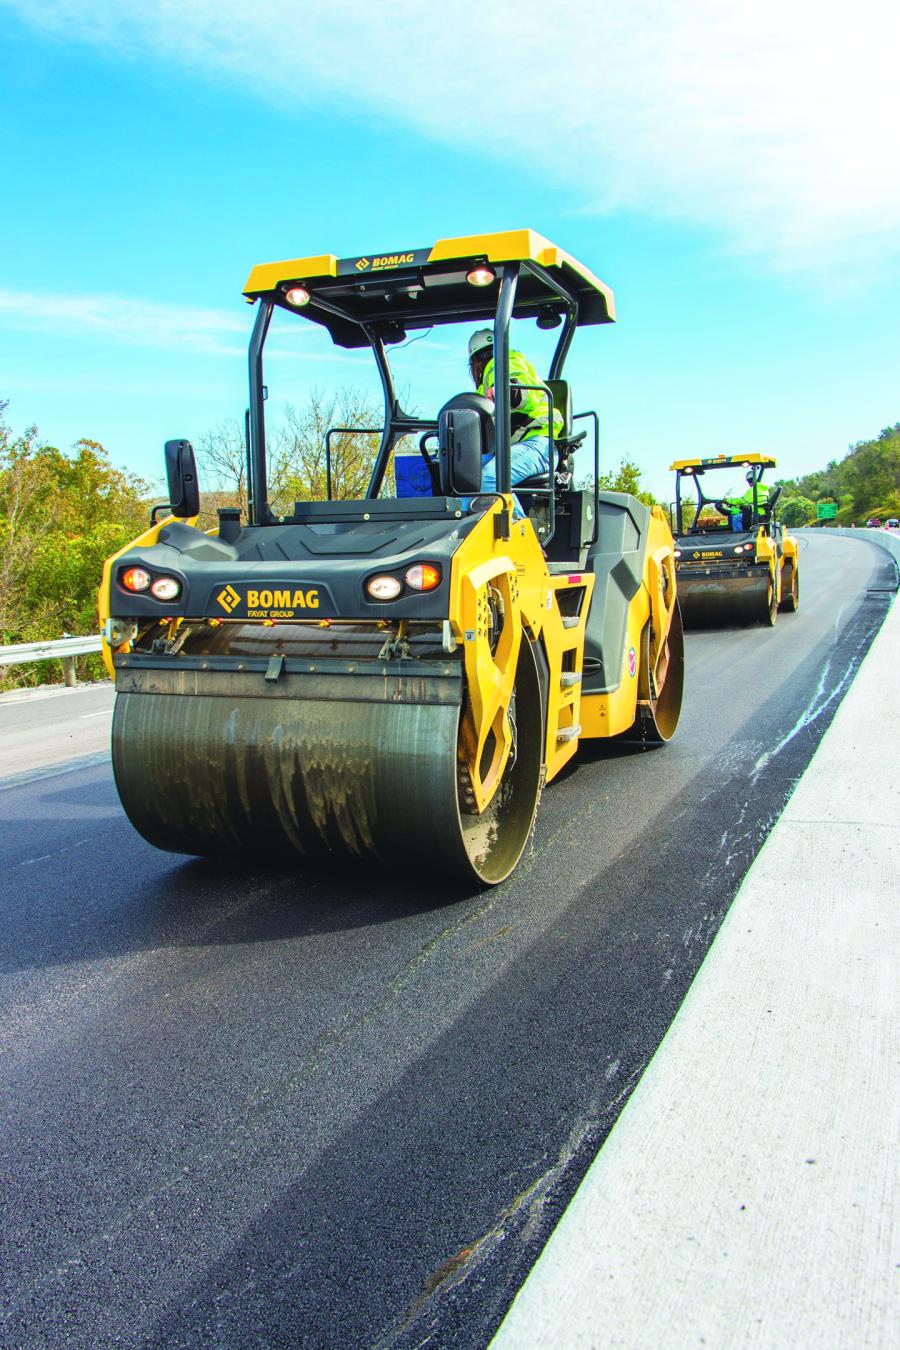 Bomag offers three different vibration technologies — vertical, TanGO and Asphalt Manager — throughout the asphalt roller line.